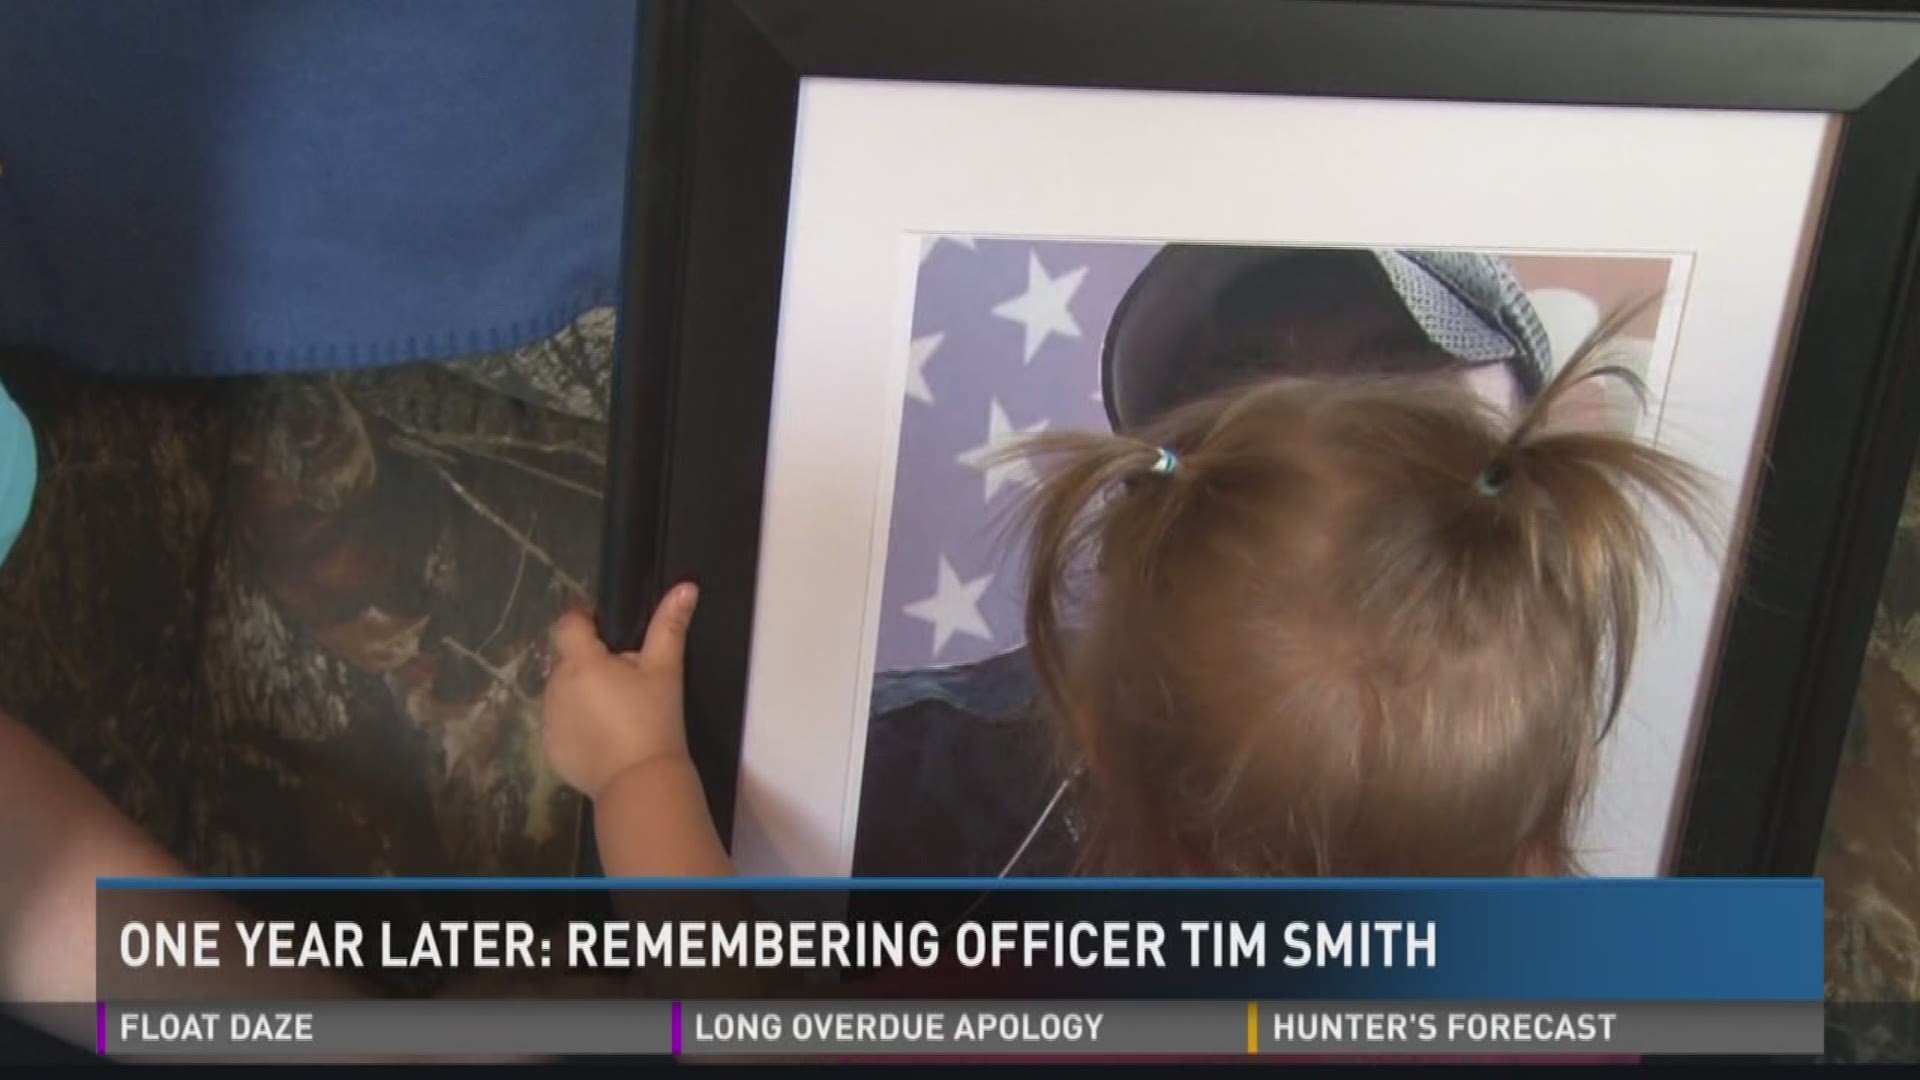 Remembering Officer Tim Smith one year later